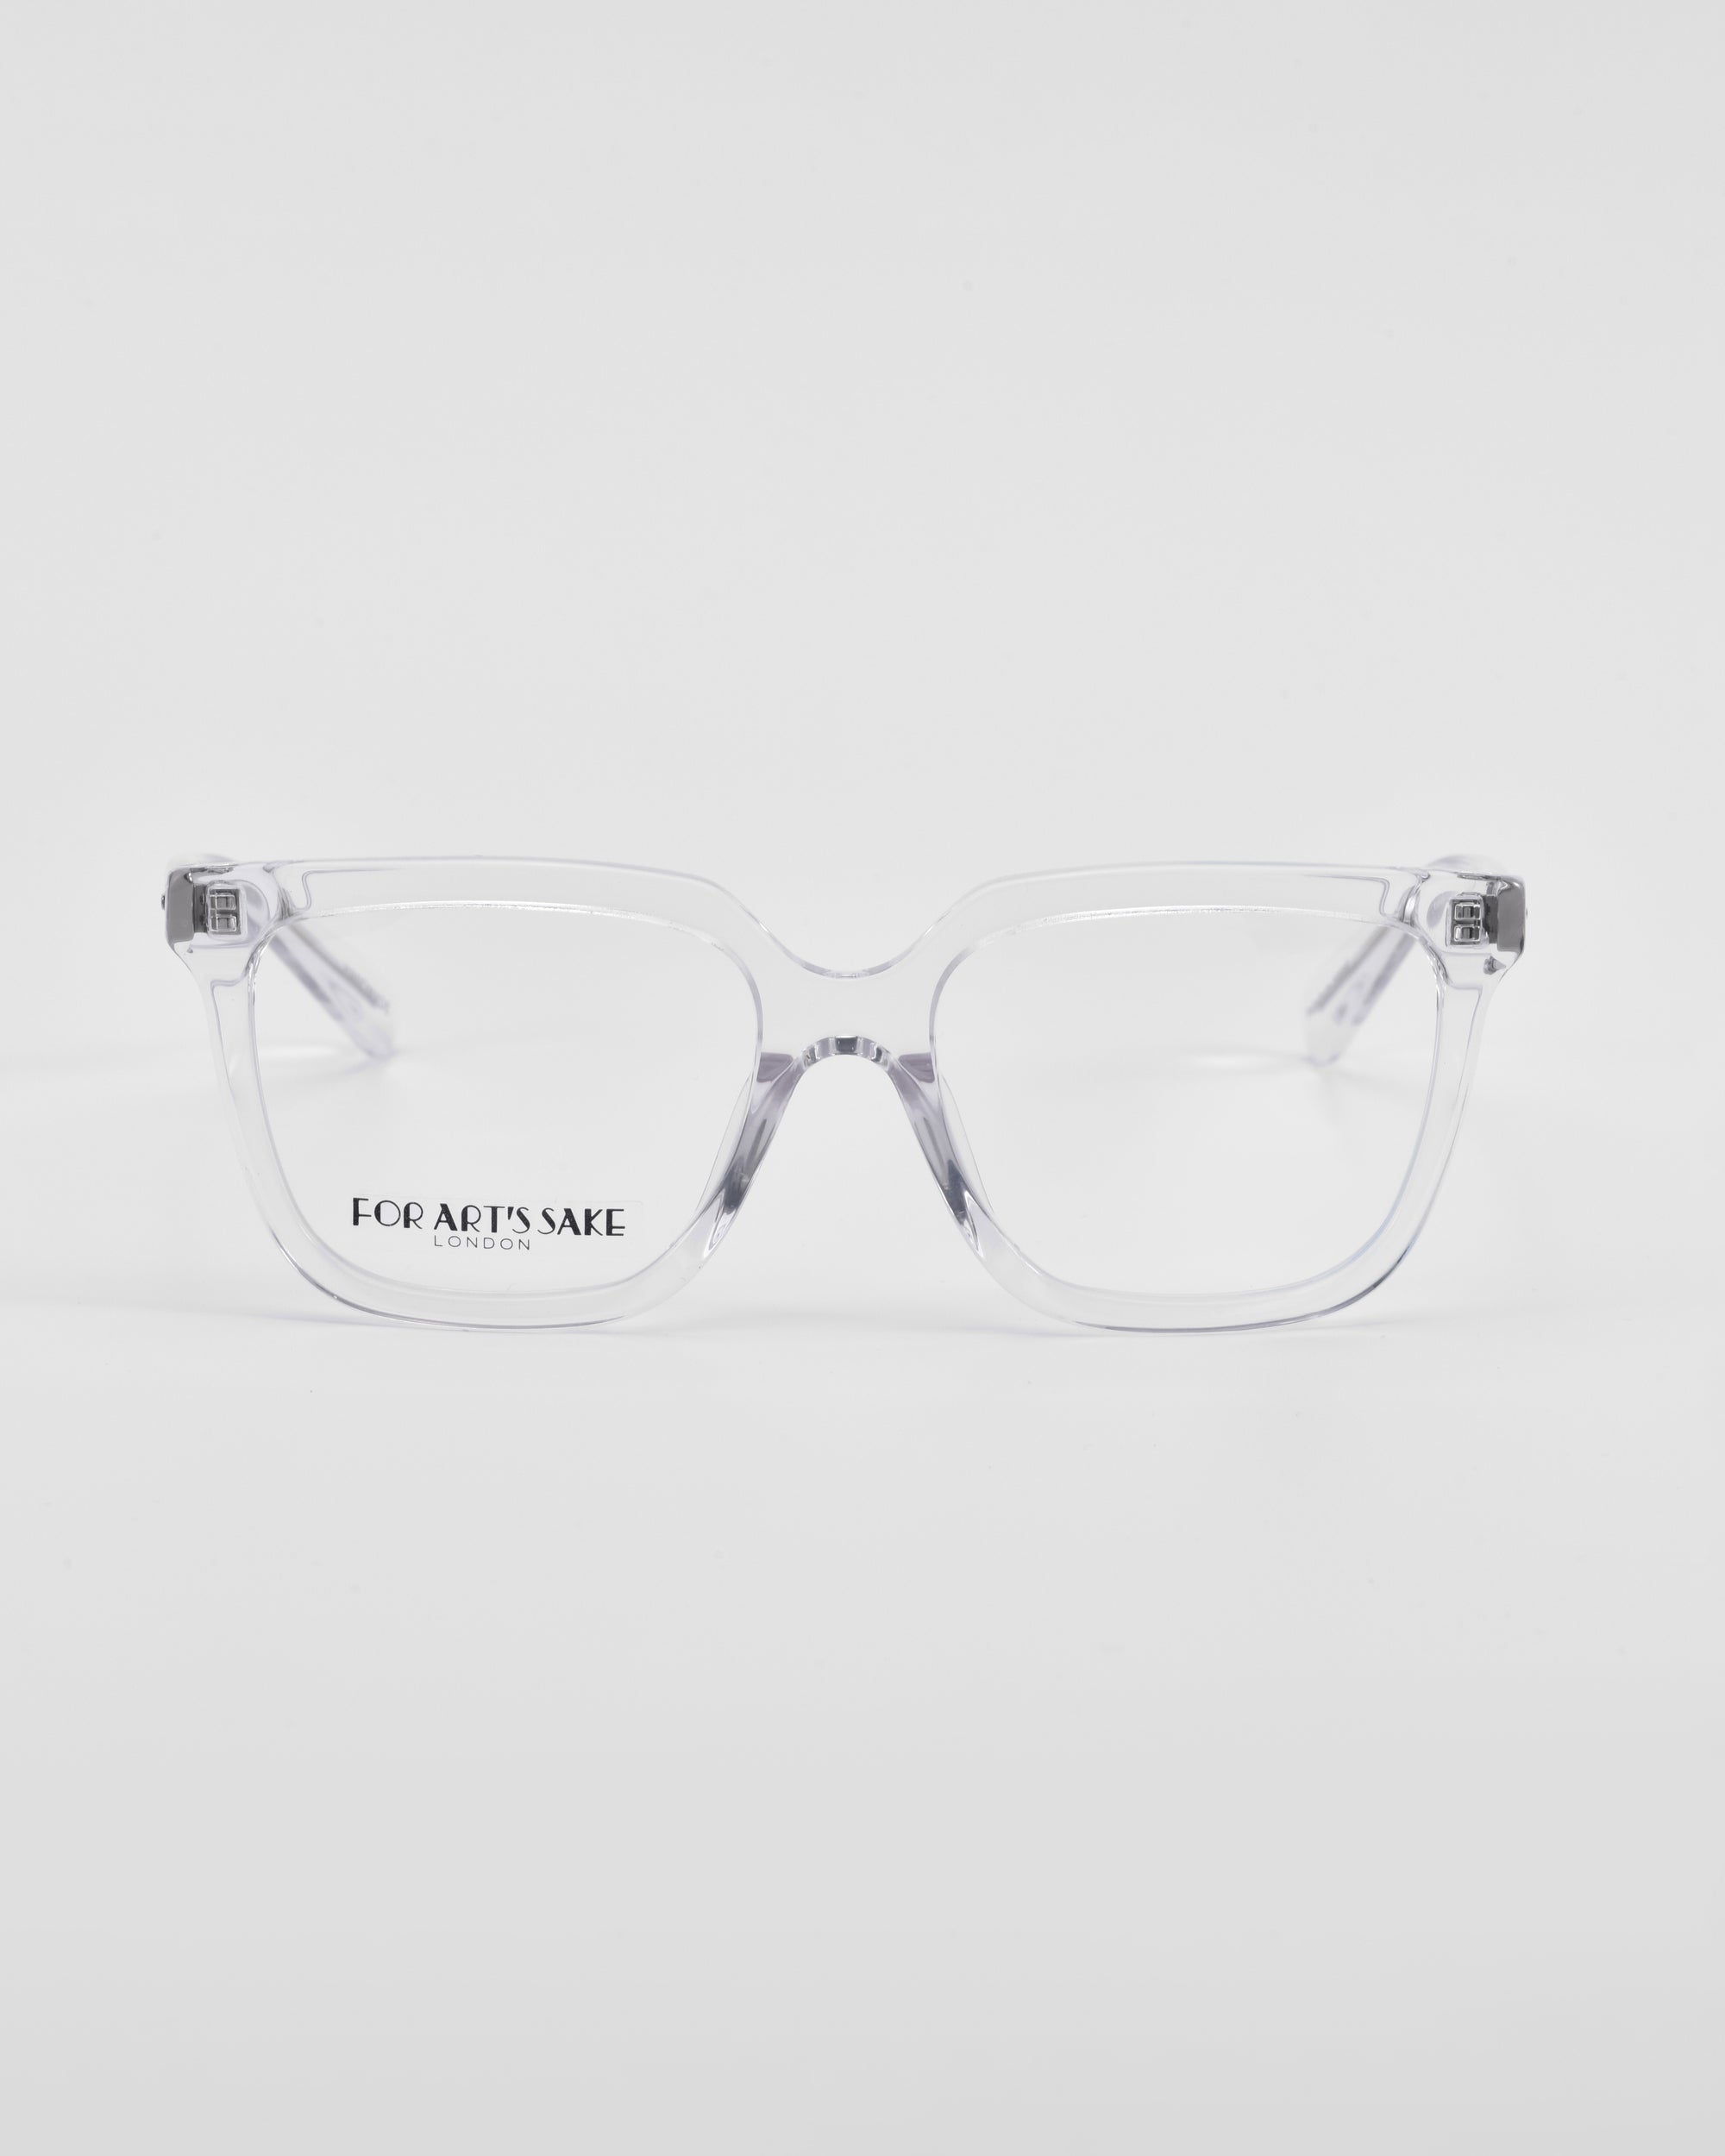 A pair of rectangular, clear-framed eyeglasses with thin arms and transparent lenses is placed against a plain white background. The brand name &quot;For Art&#39;s Sake®&quot; is visible on the left lens, showcasing a classic square silhouette perfect for prescription service.